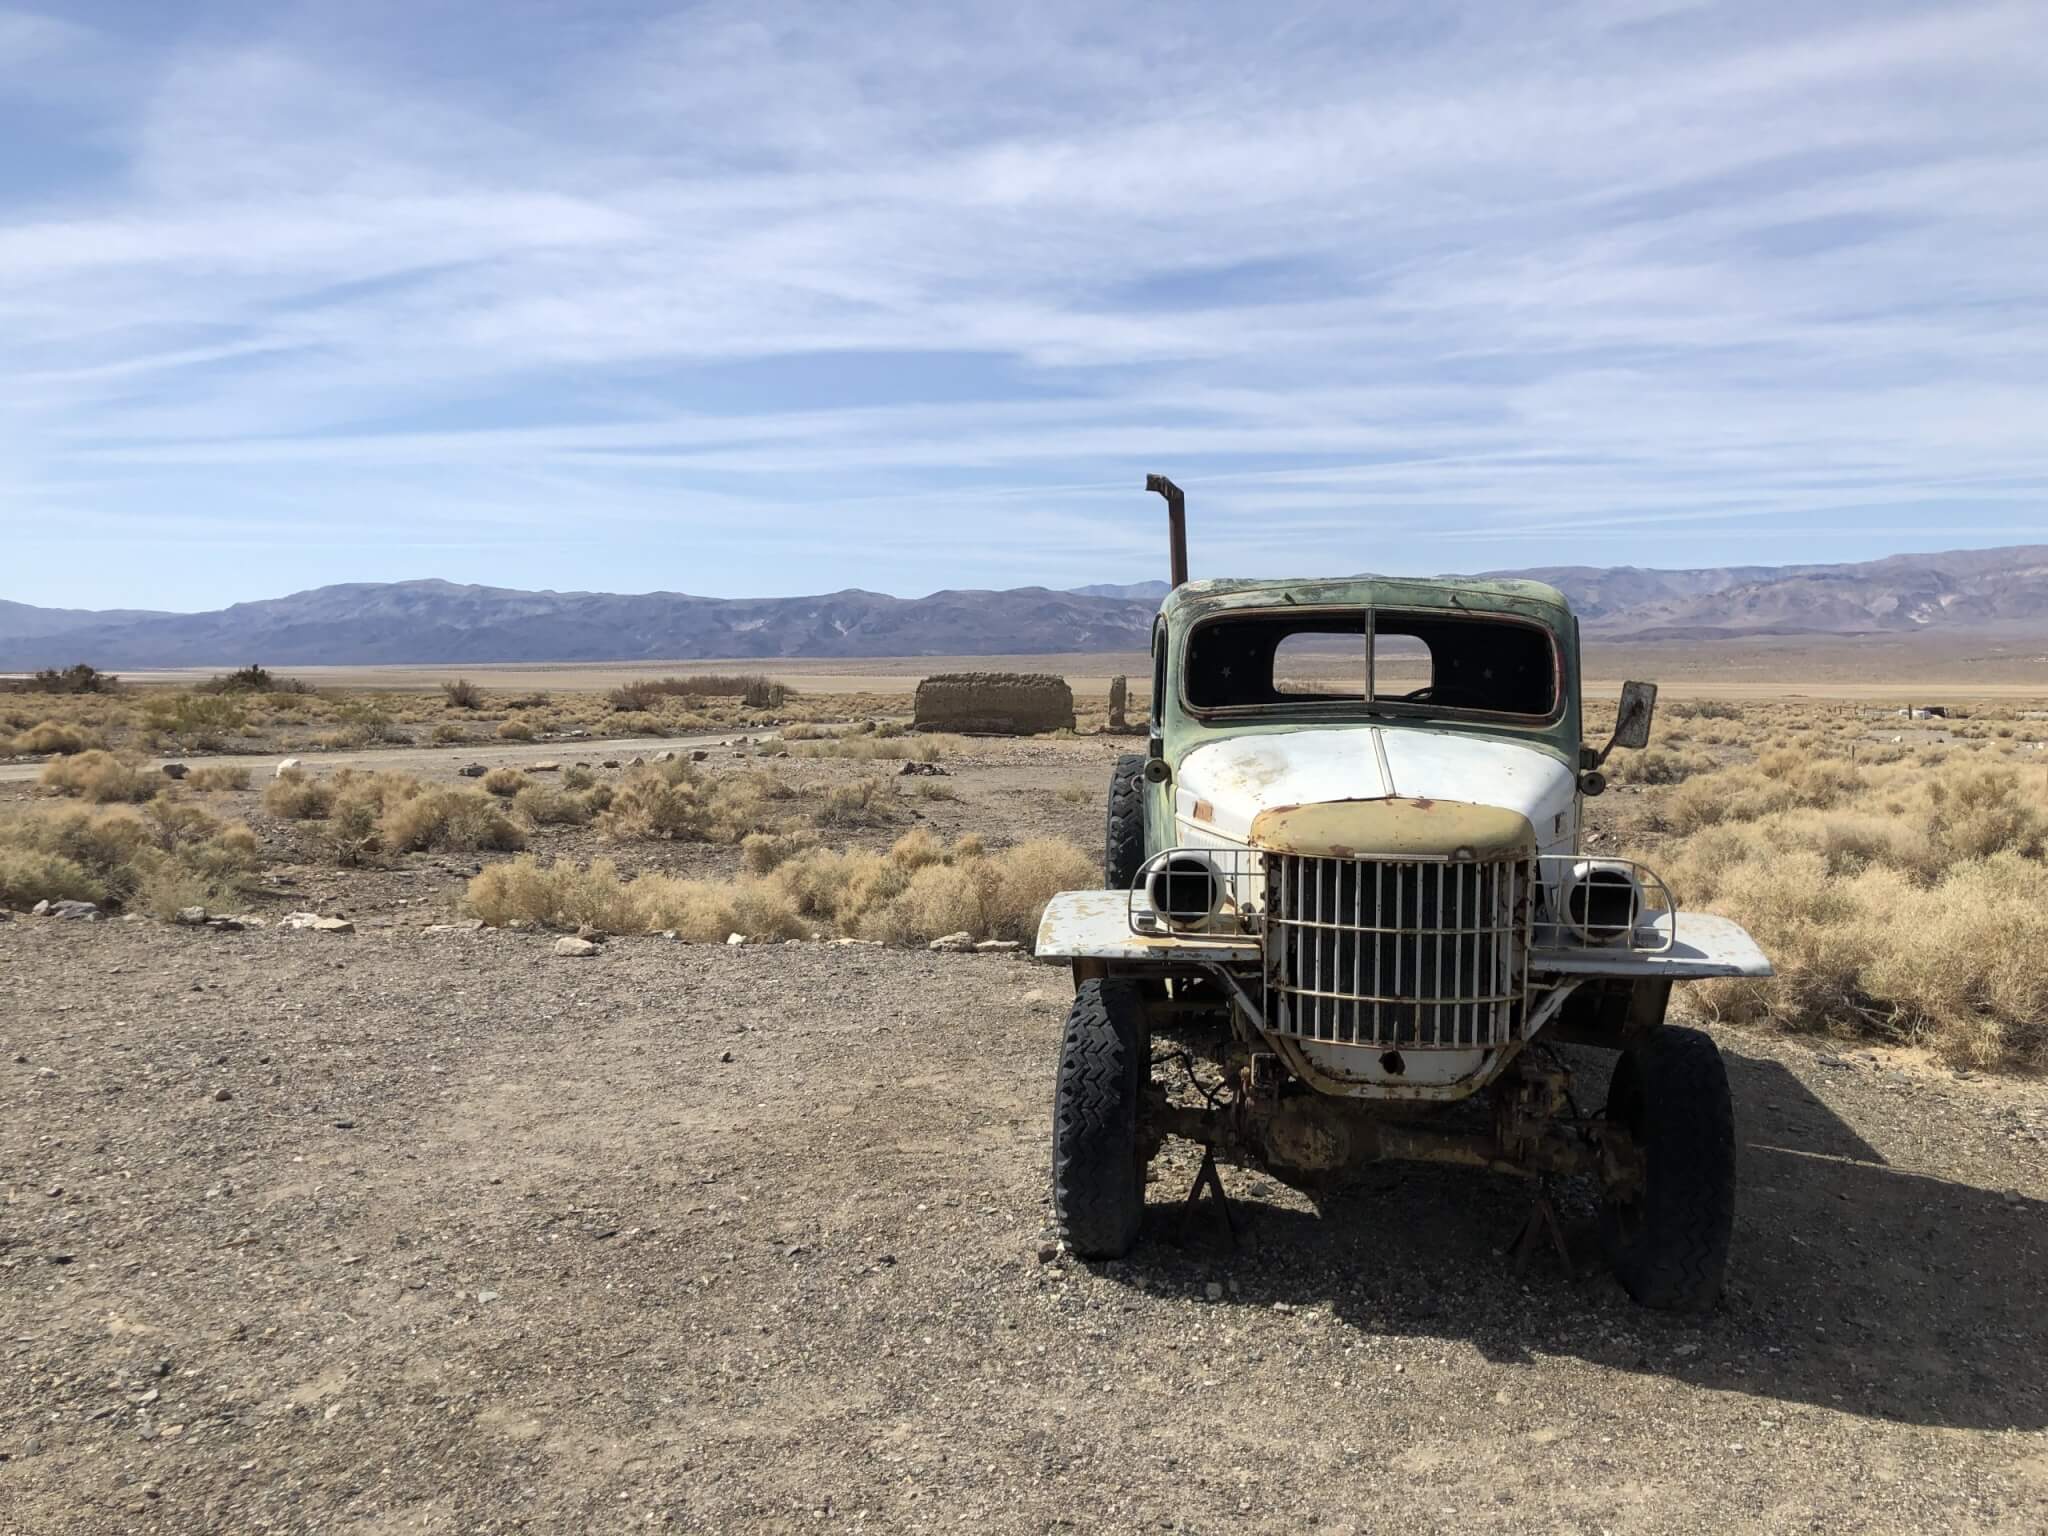 Panamint City: Camping in a Remote Ghost Town